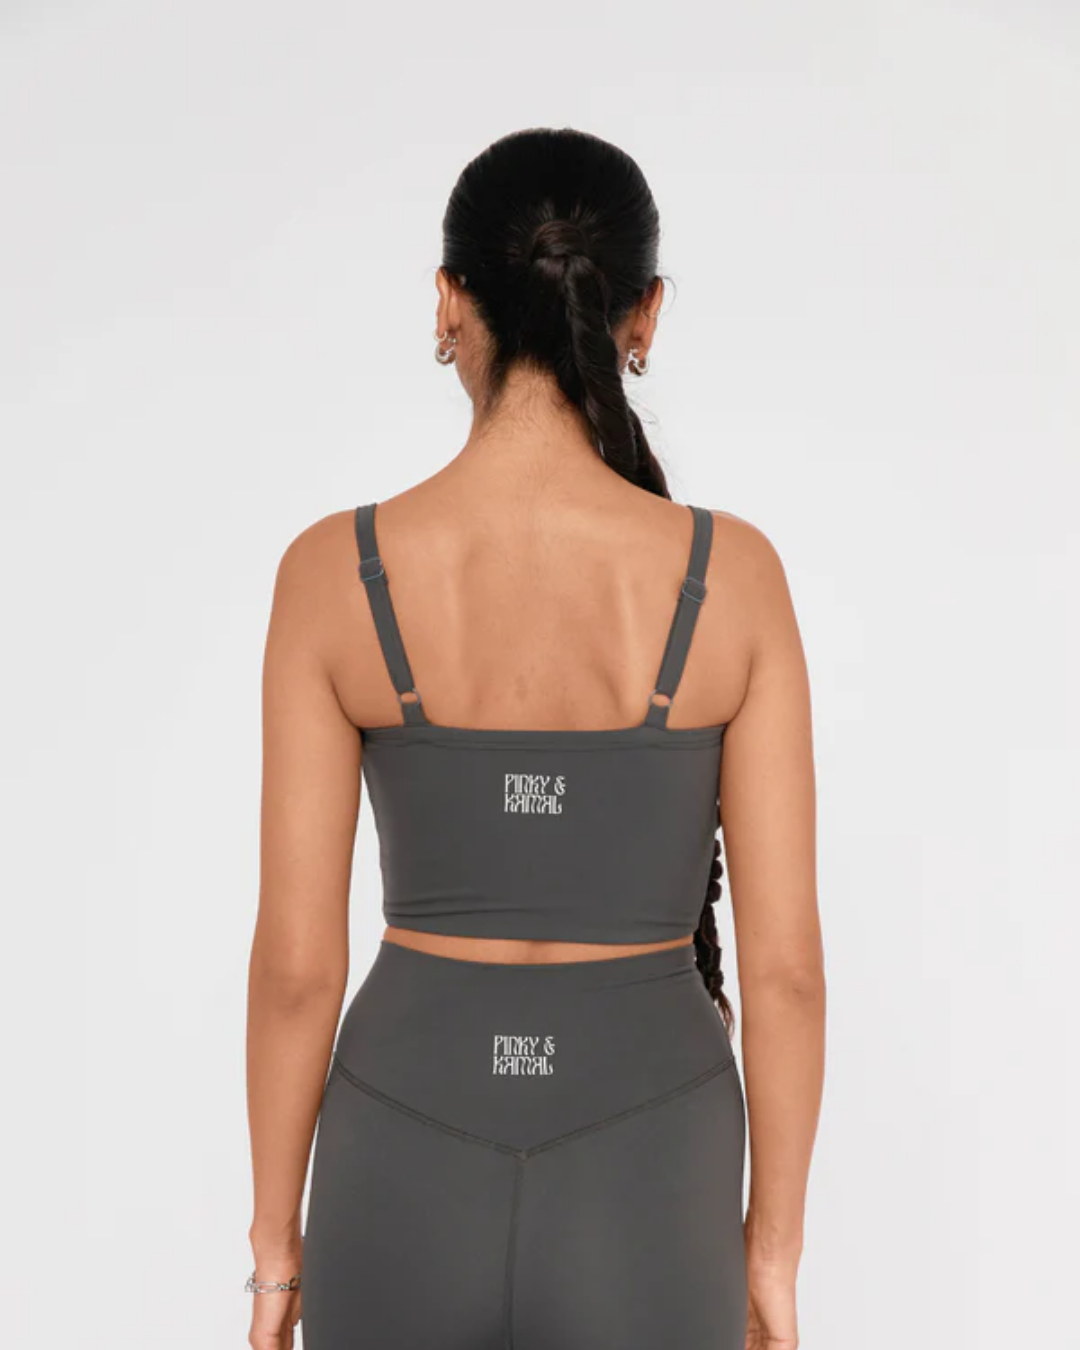 Daily Habits Crop - Charcoal Activewear by Pinky & Kamal - Prae Wellness